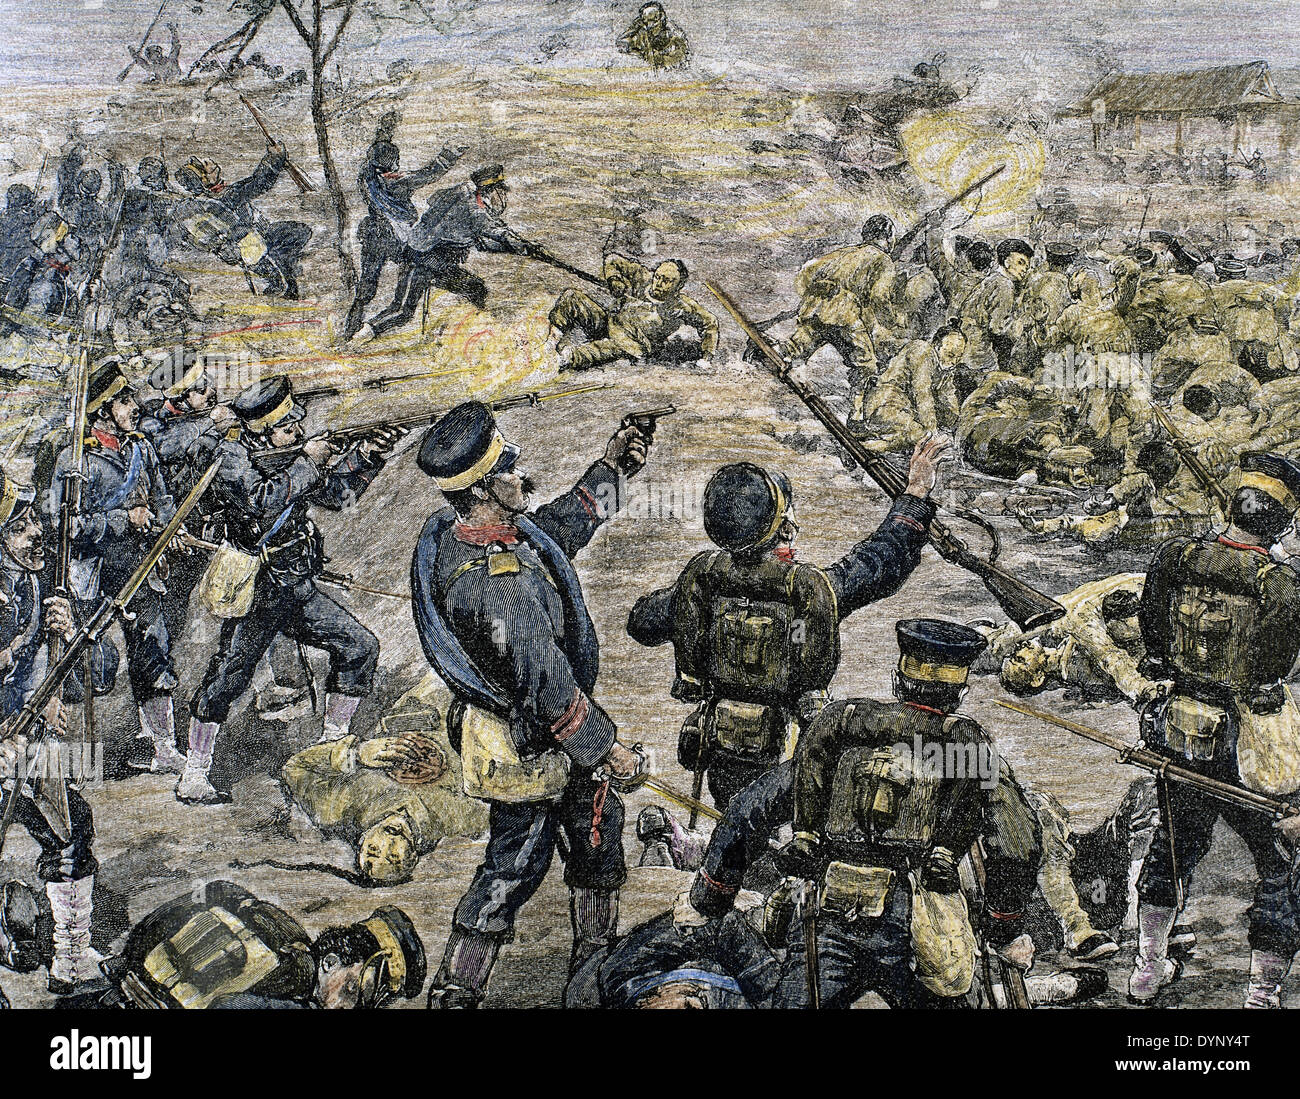 First Sino-Japanese War (1894-1895). Battle of Ping-Yang (September 15, 1894). The Japanese take a Chinese position. Colored. Stock Photo